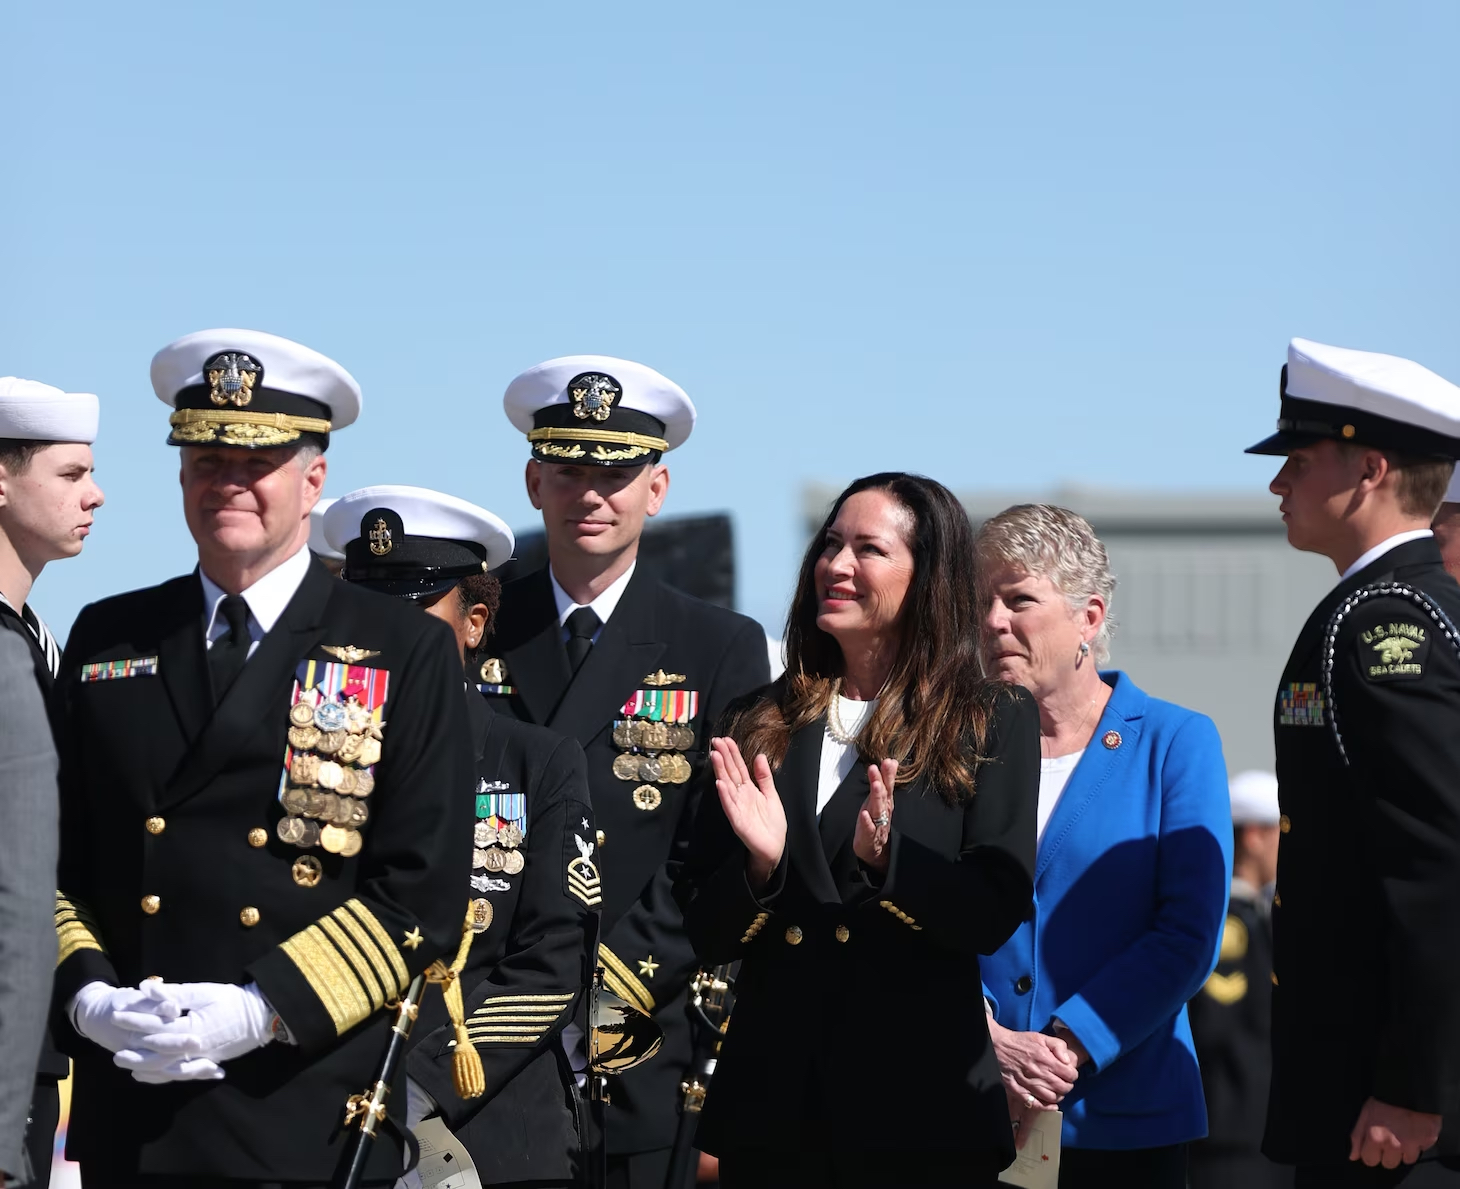 Adm. Samuel J. Paparo, commander, U.S. Pacific Fleet, left, Cdr. Brian Sparks, commanding officer, Independence-class variant littoral combat ship USS Santa Barbara (LCS32), center, Lola Zinke, ships sponsor, and Congresswoman Julia Brownley, prepare to take the stage during the LCS32 Commissioning Ceremony onboard Naval Base Ventura County (NBVC), Port Hueneme, Apr. 1, 2023. Littoral Combat Ships are fast, optimally-manned, mission-tailored surface combatants that operate in near-shore and open-ocean environments, winning against 21st-century coastal threats. LCS integrate with joint, combined, manned and unmanned teams to support forward presence, maritime security, sea control, and deterrence missions around the globe. NBVC is a strategically located Naval installation composed of three operating facilities: Point Mugu, Port Hueneme and San Nicolas Island. NBVC is the home of the Pacific Seabees, West Coast E-2D Hawkeyes, 3 warfare centers and 80 tenants. Photo: U.S. Navy Mass Communication 1st Class Douglas "Evan" Parker